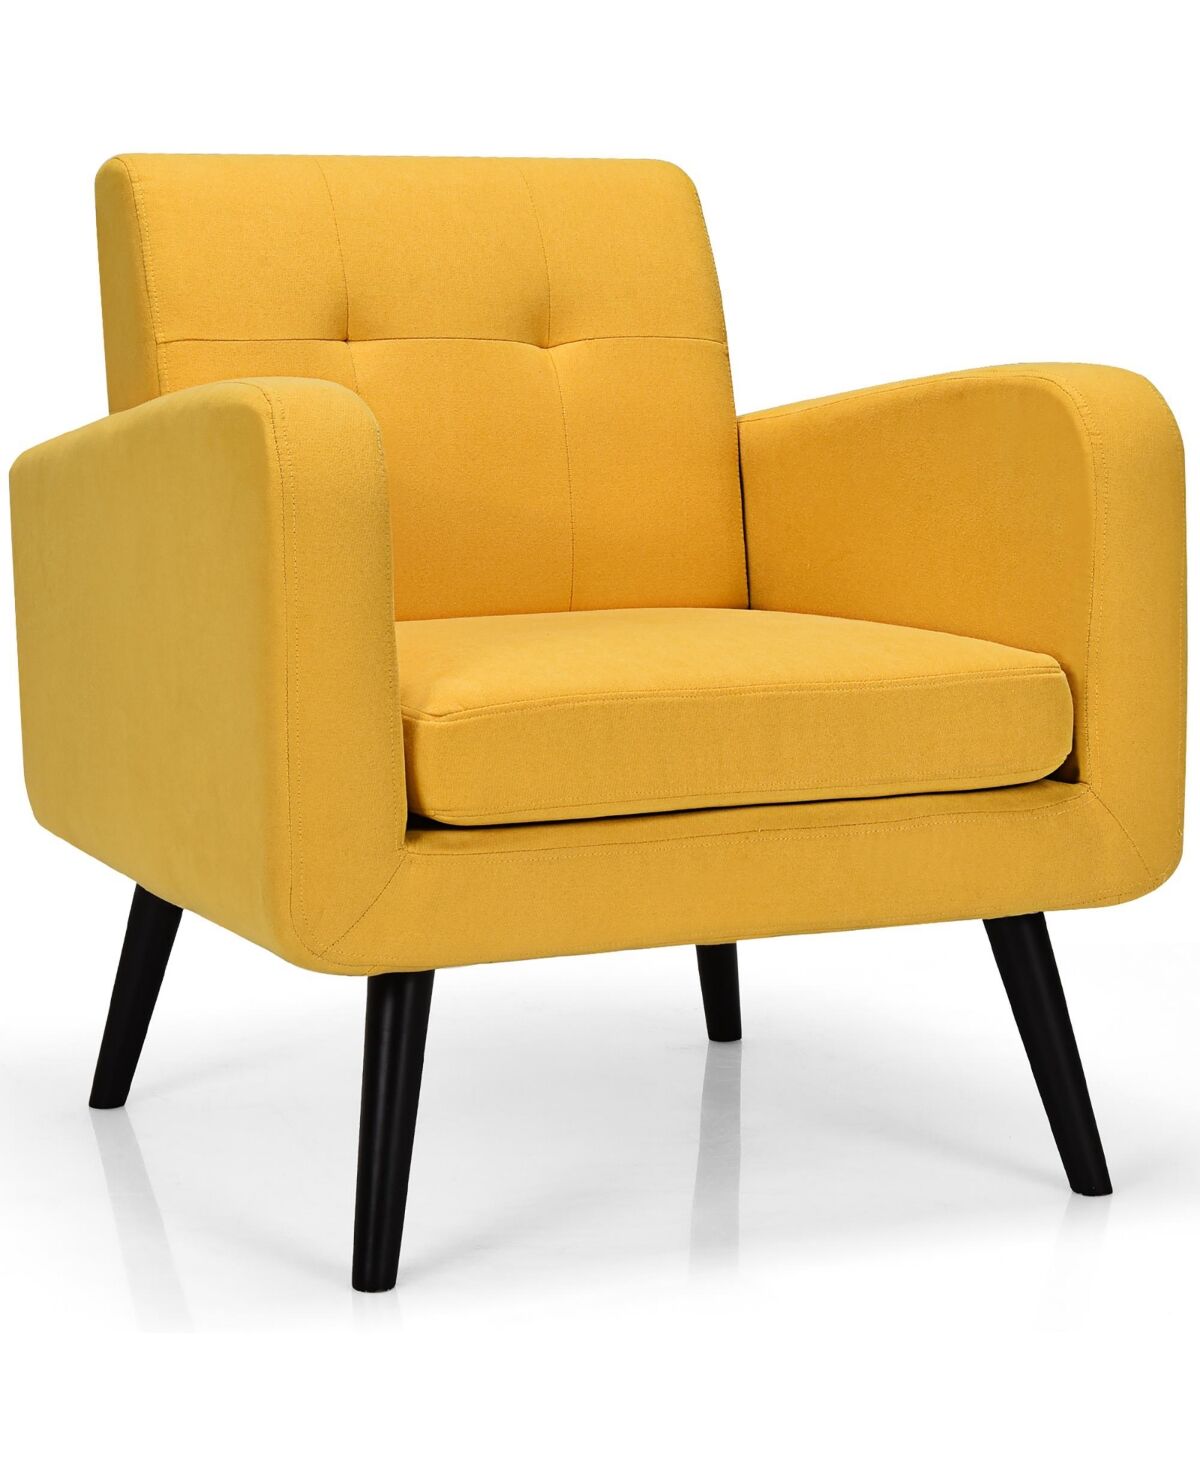 Costway Mid Century Accent Chair Fabric Arm Chair Single Sofa - Yellow